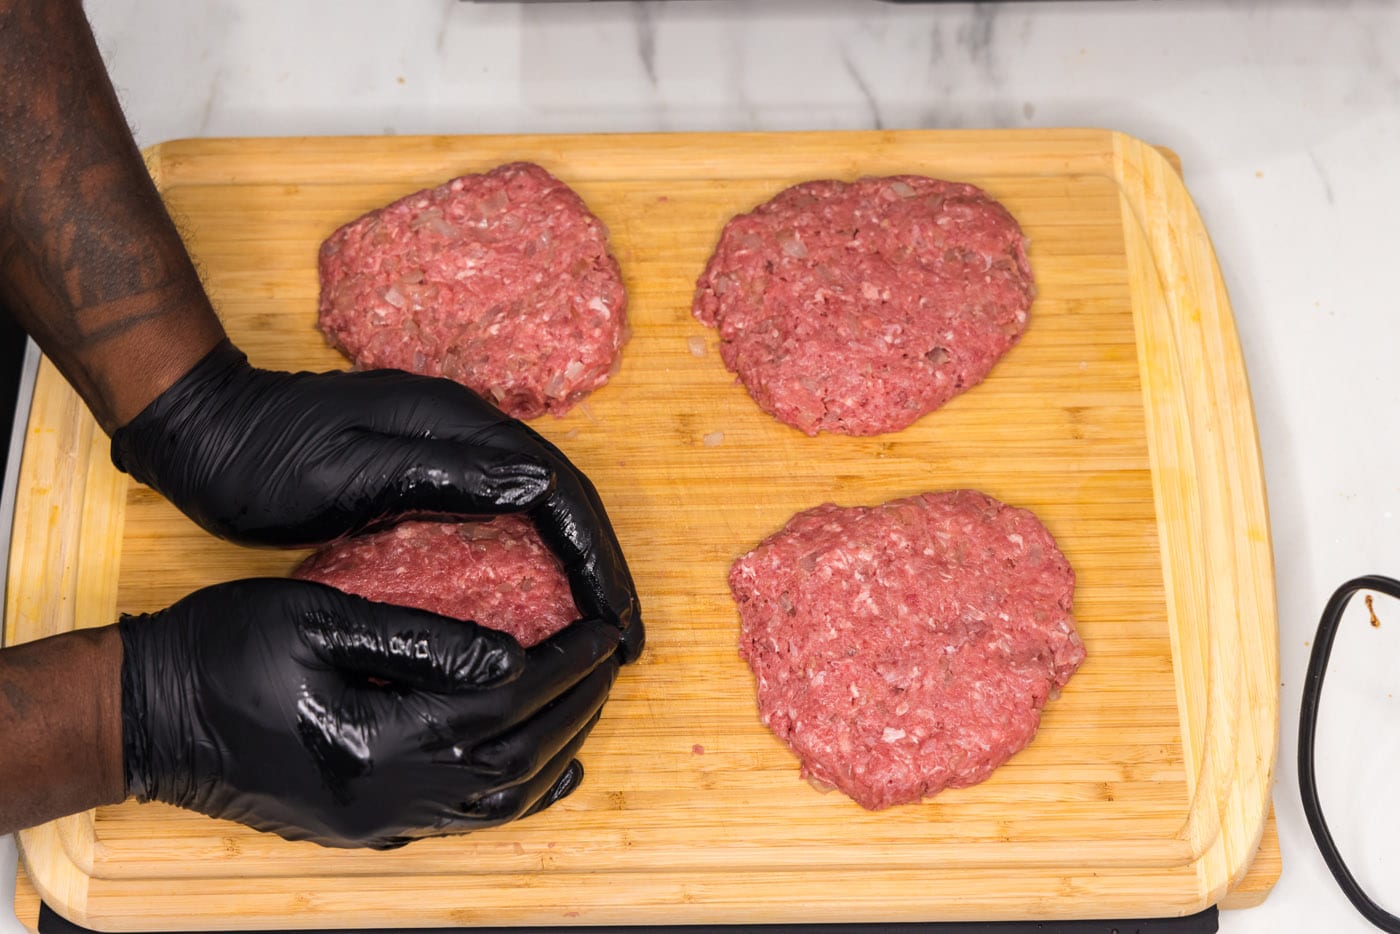 shaping ground beef into burger patties